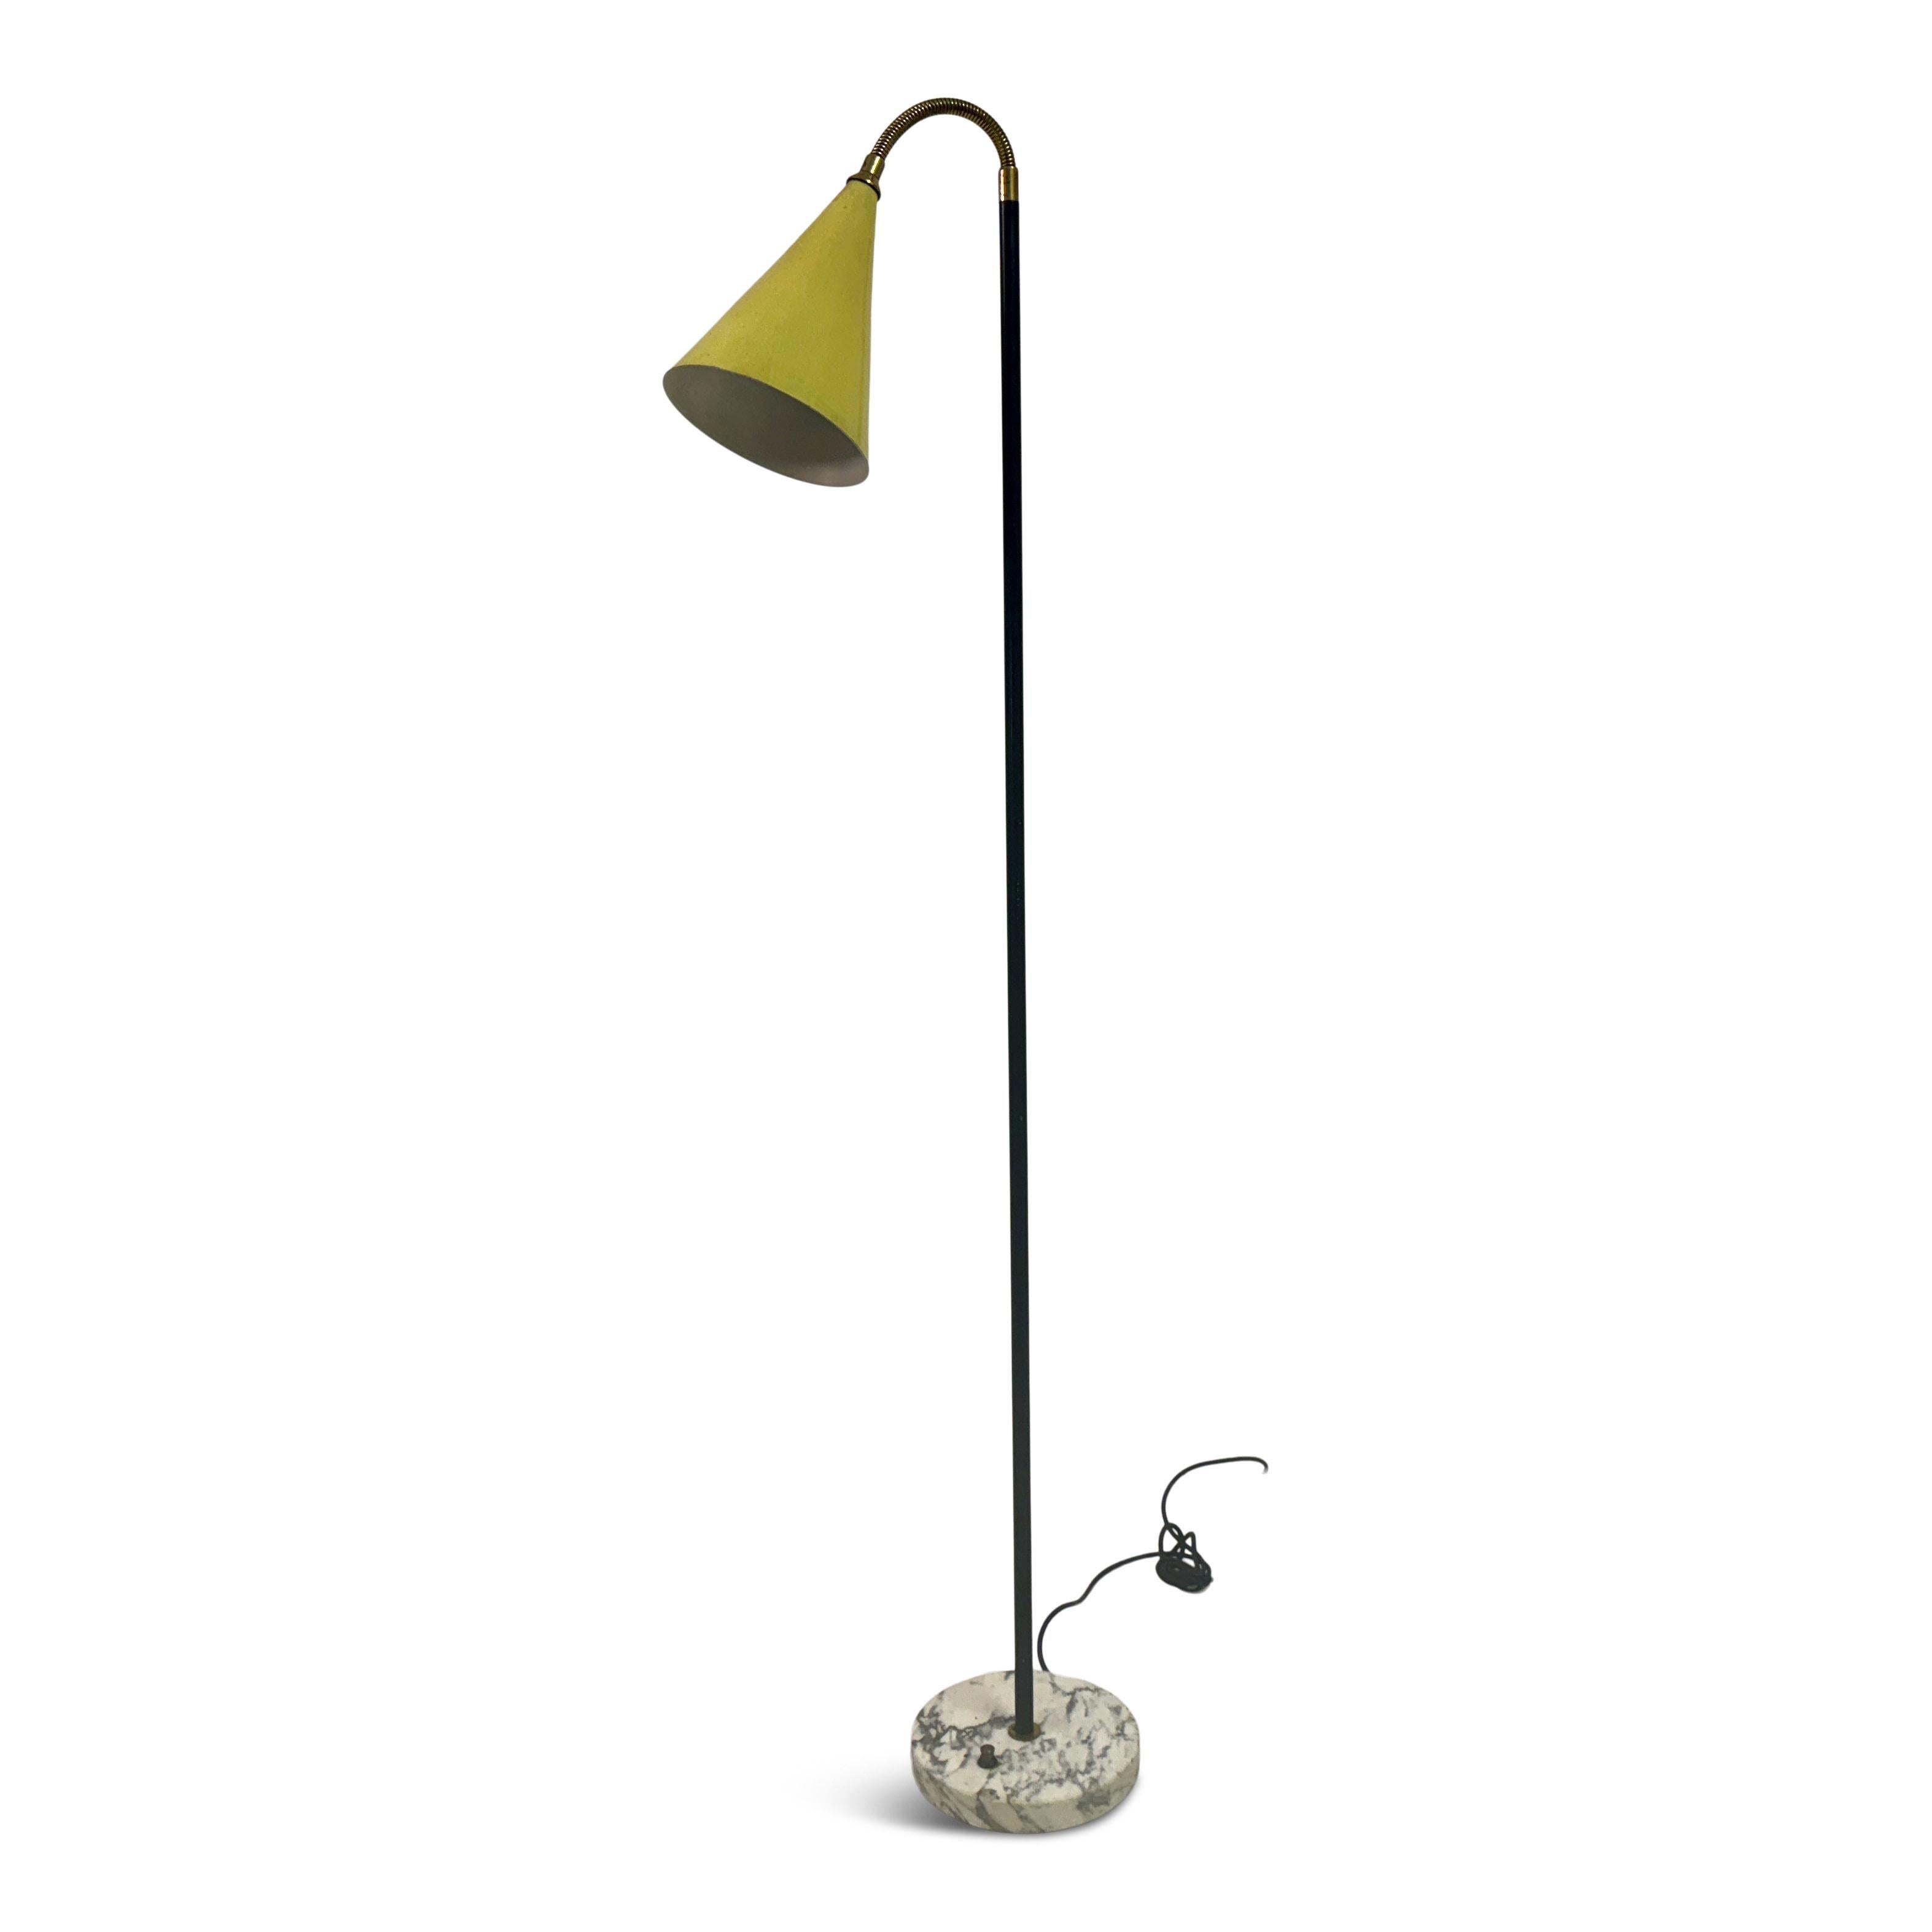 Floor lamp

Brass adjustable neck

Yellow enamel shade

Black painted stem

Abescato marble base

Brass button

Rewired

Italy 1960s